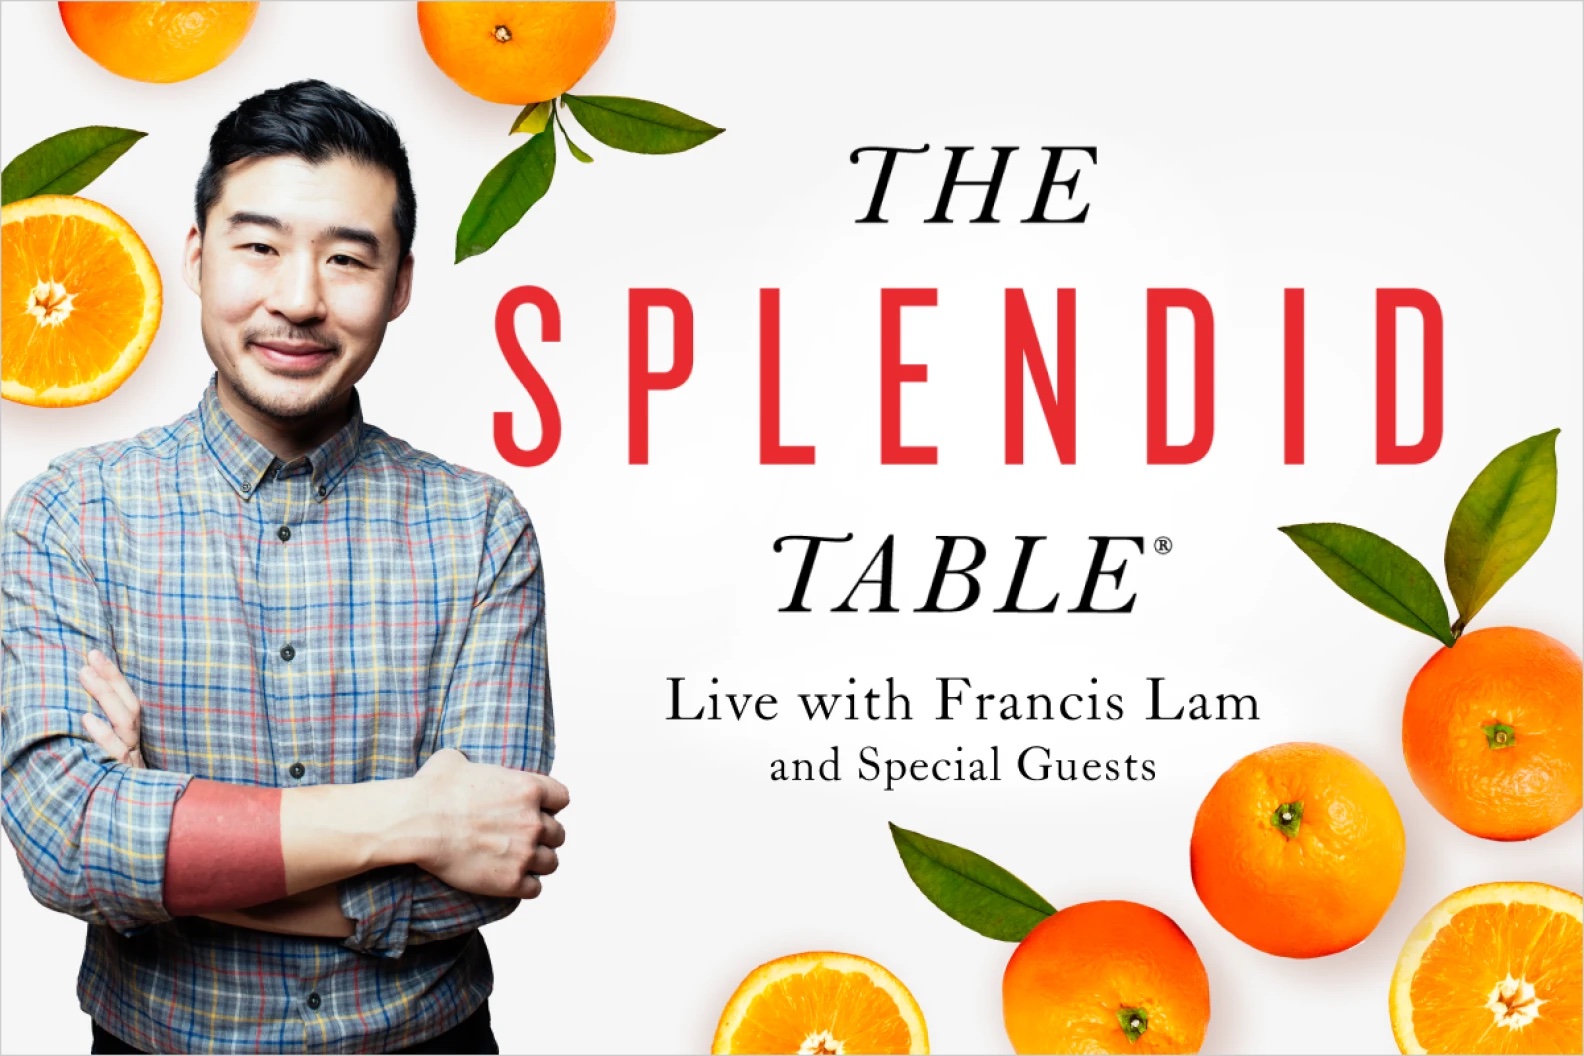 The Splendid Table Live with Francis Lam, image of man wearing plaid shirt with short black hair and images of oranges surrounding him.